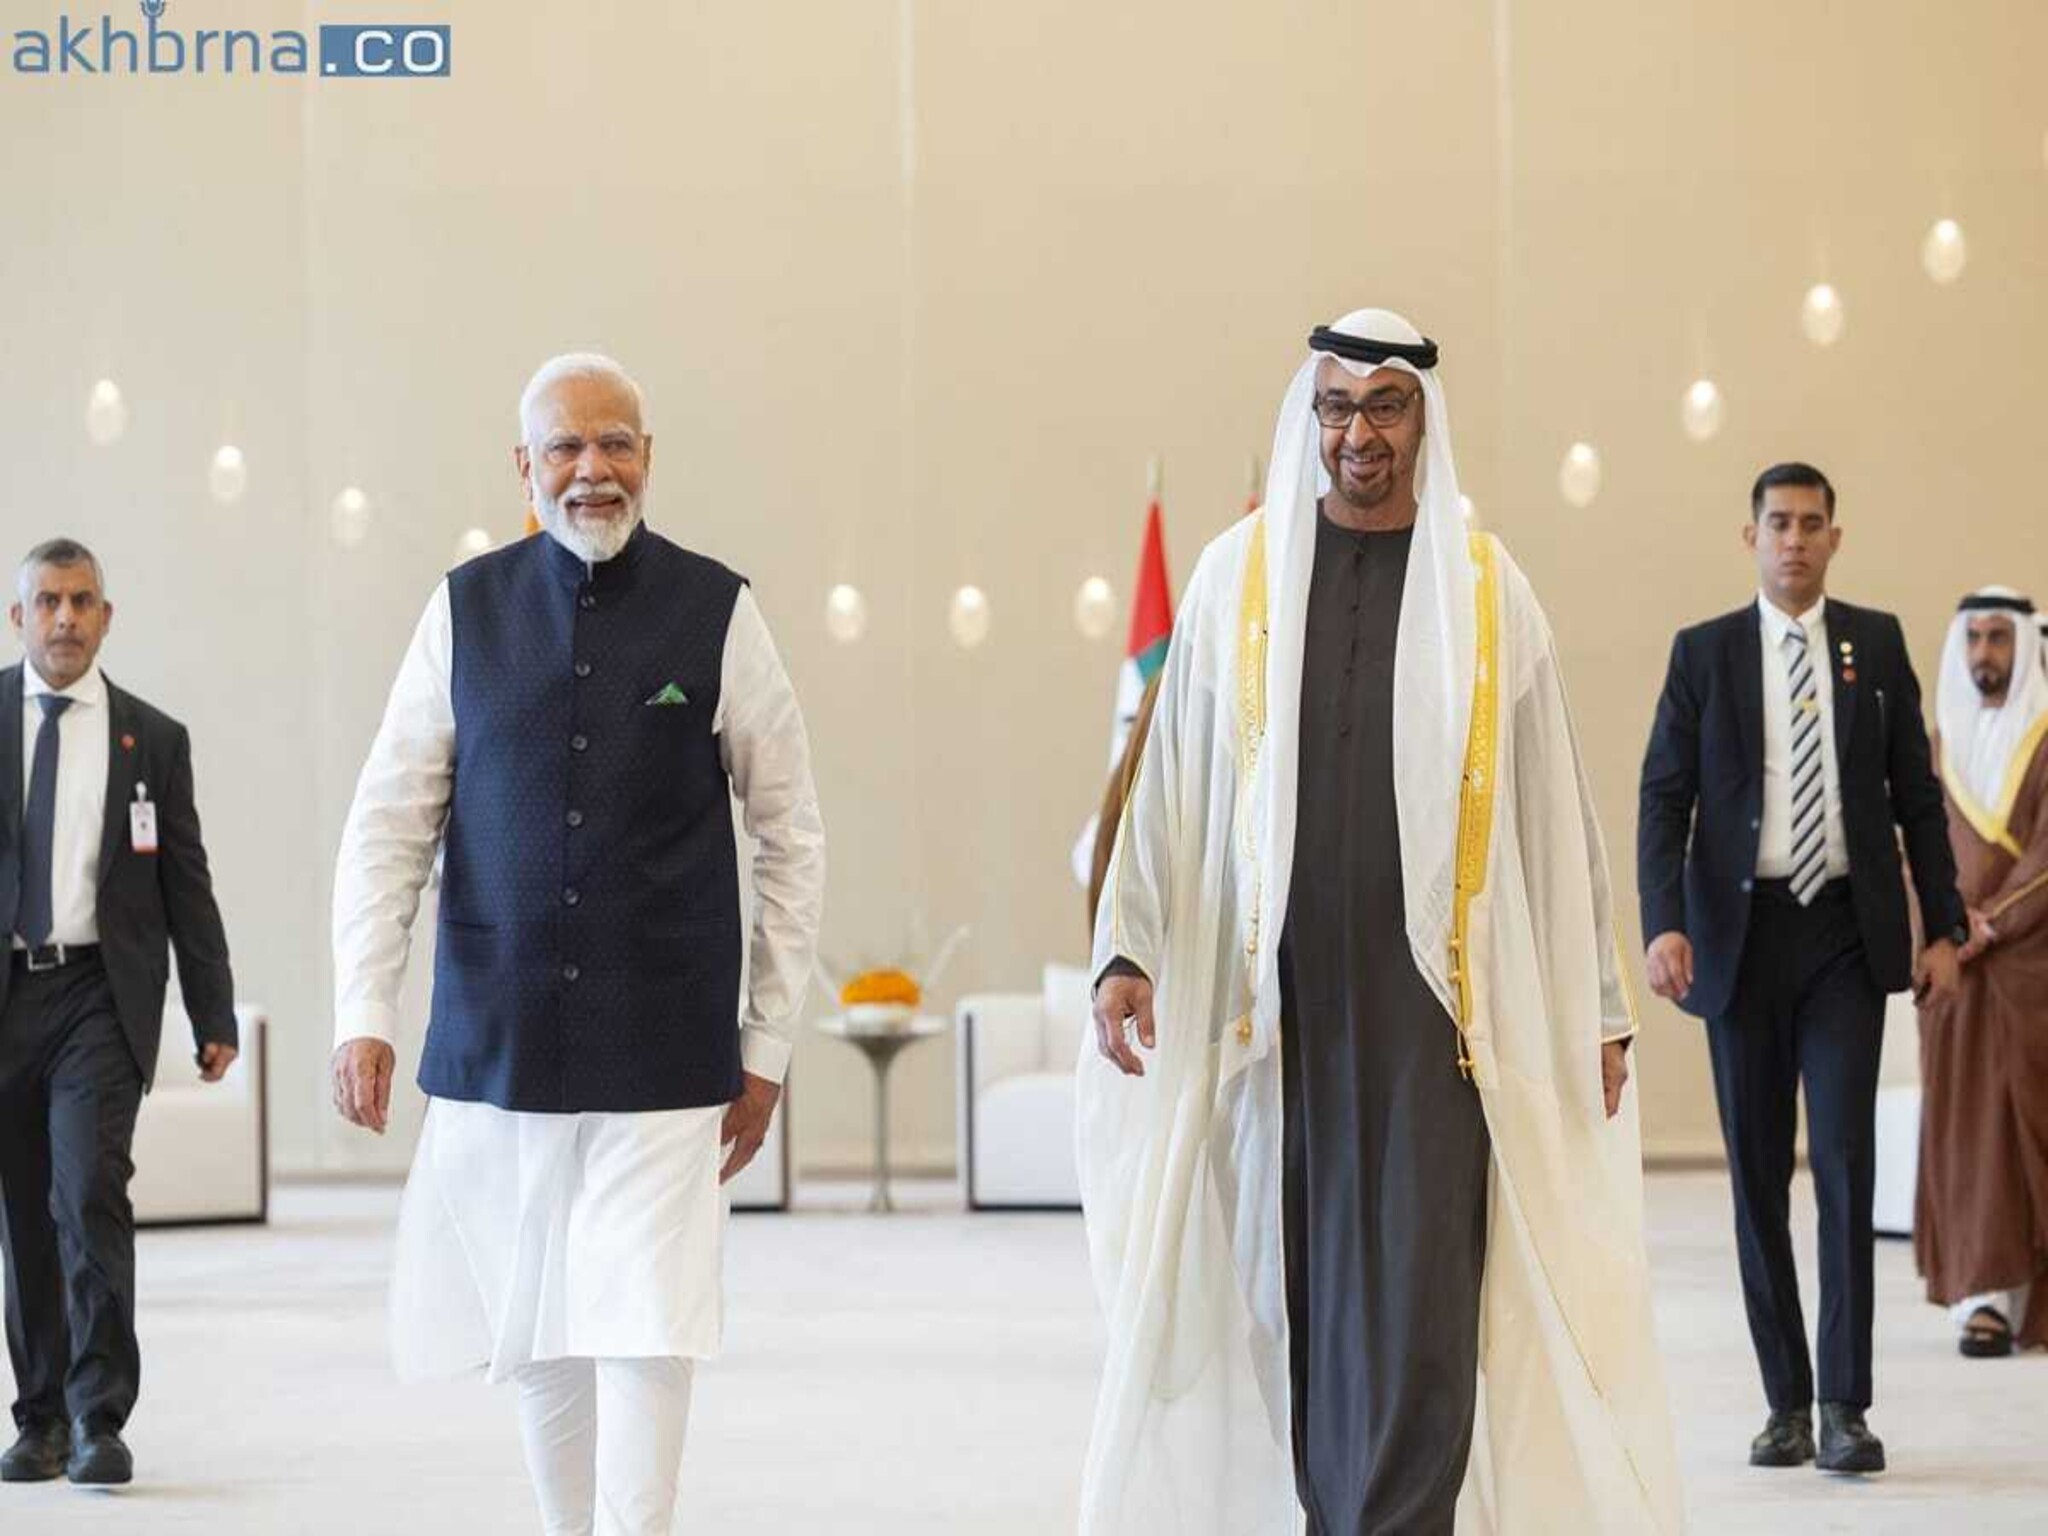 The Indian cabinet approves trade corridor plans with UAE 